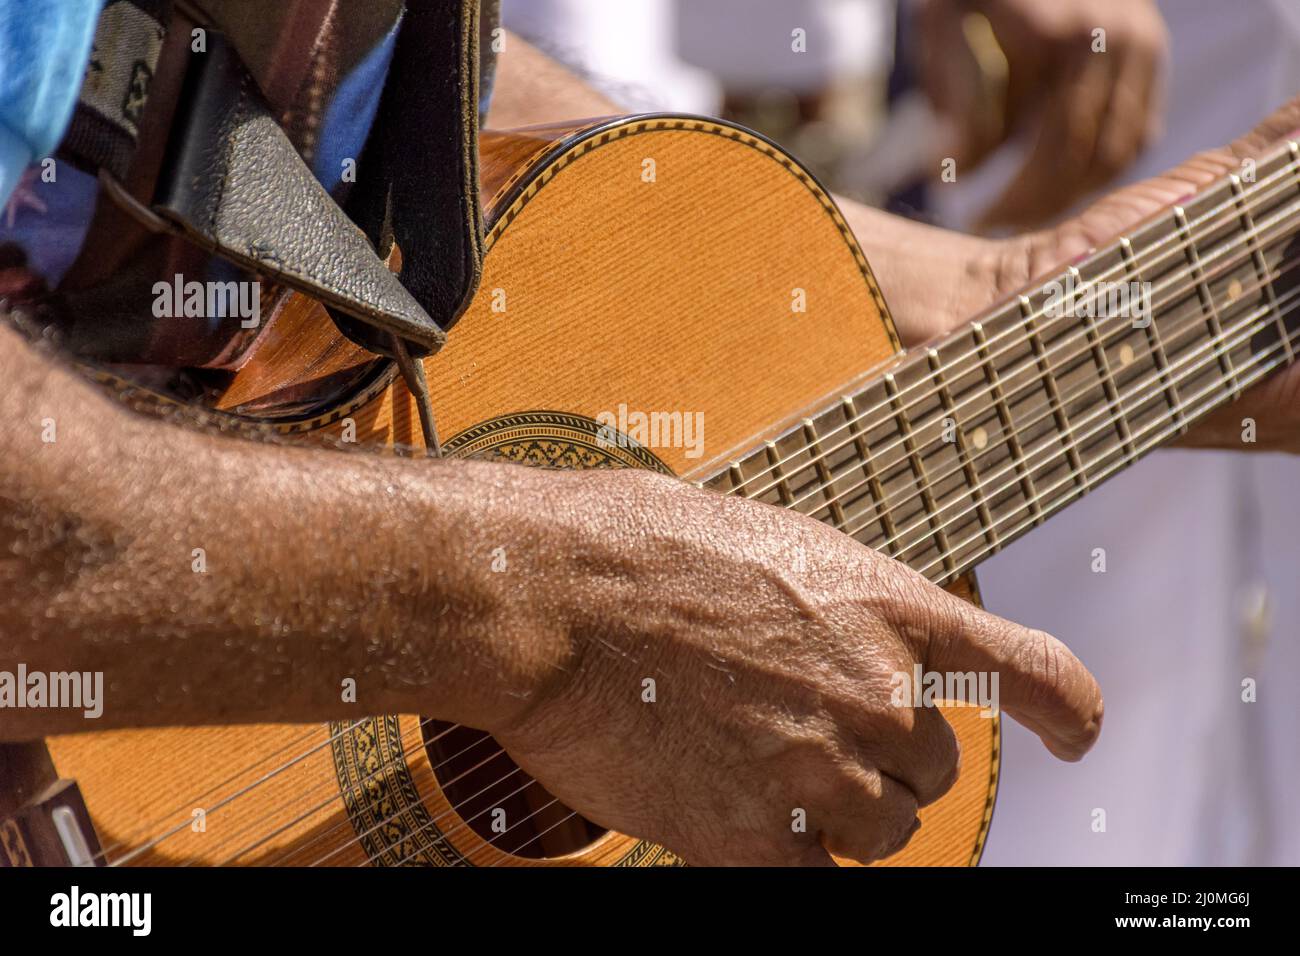 Detail of guitarist's hands and his acoustic guitar Stock Photo